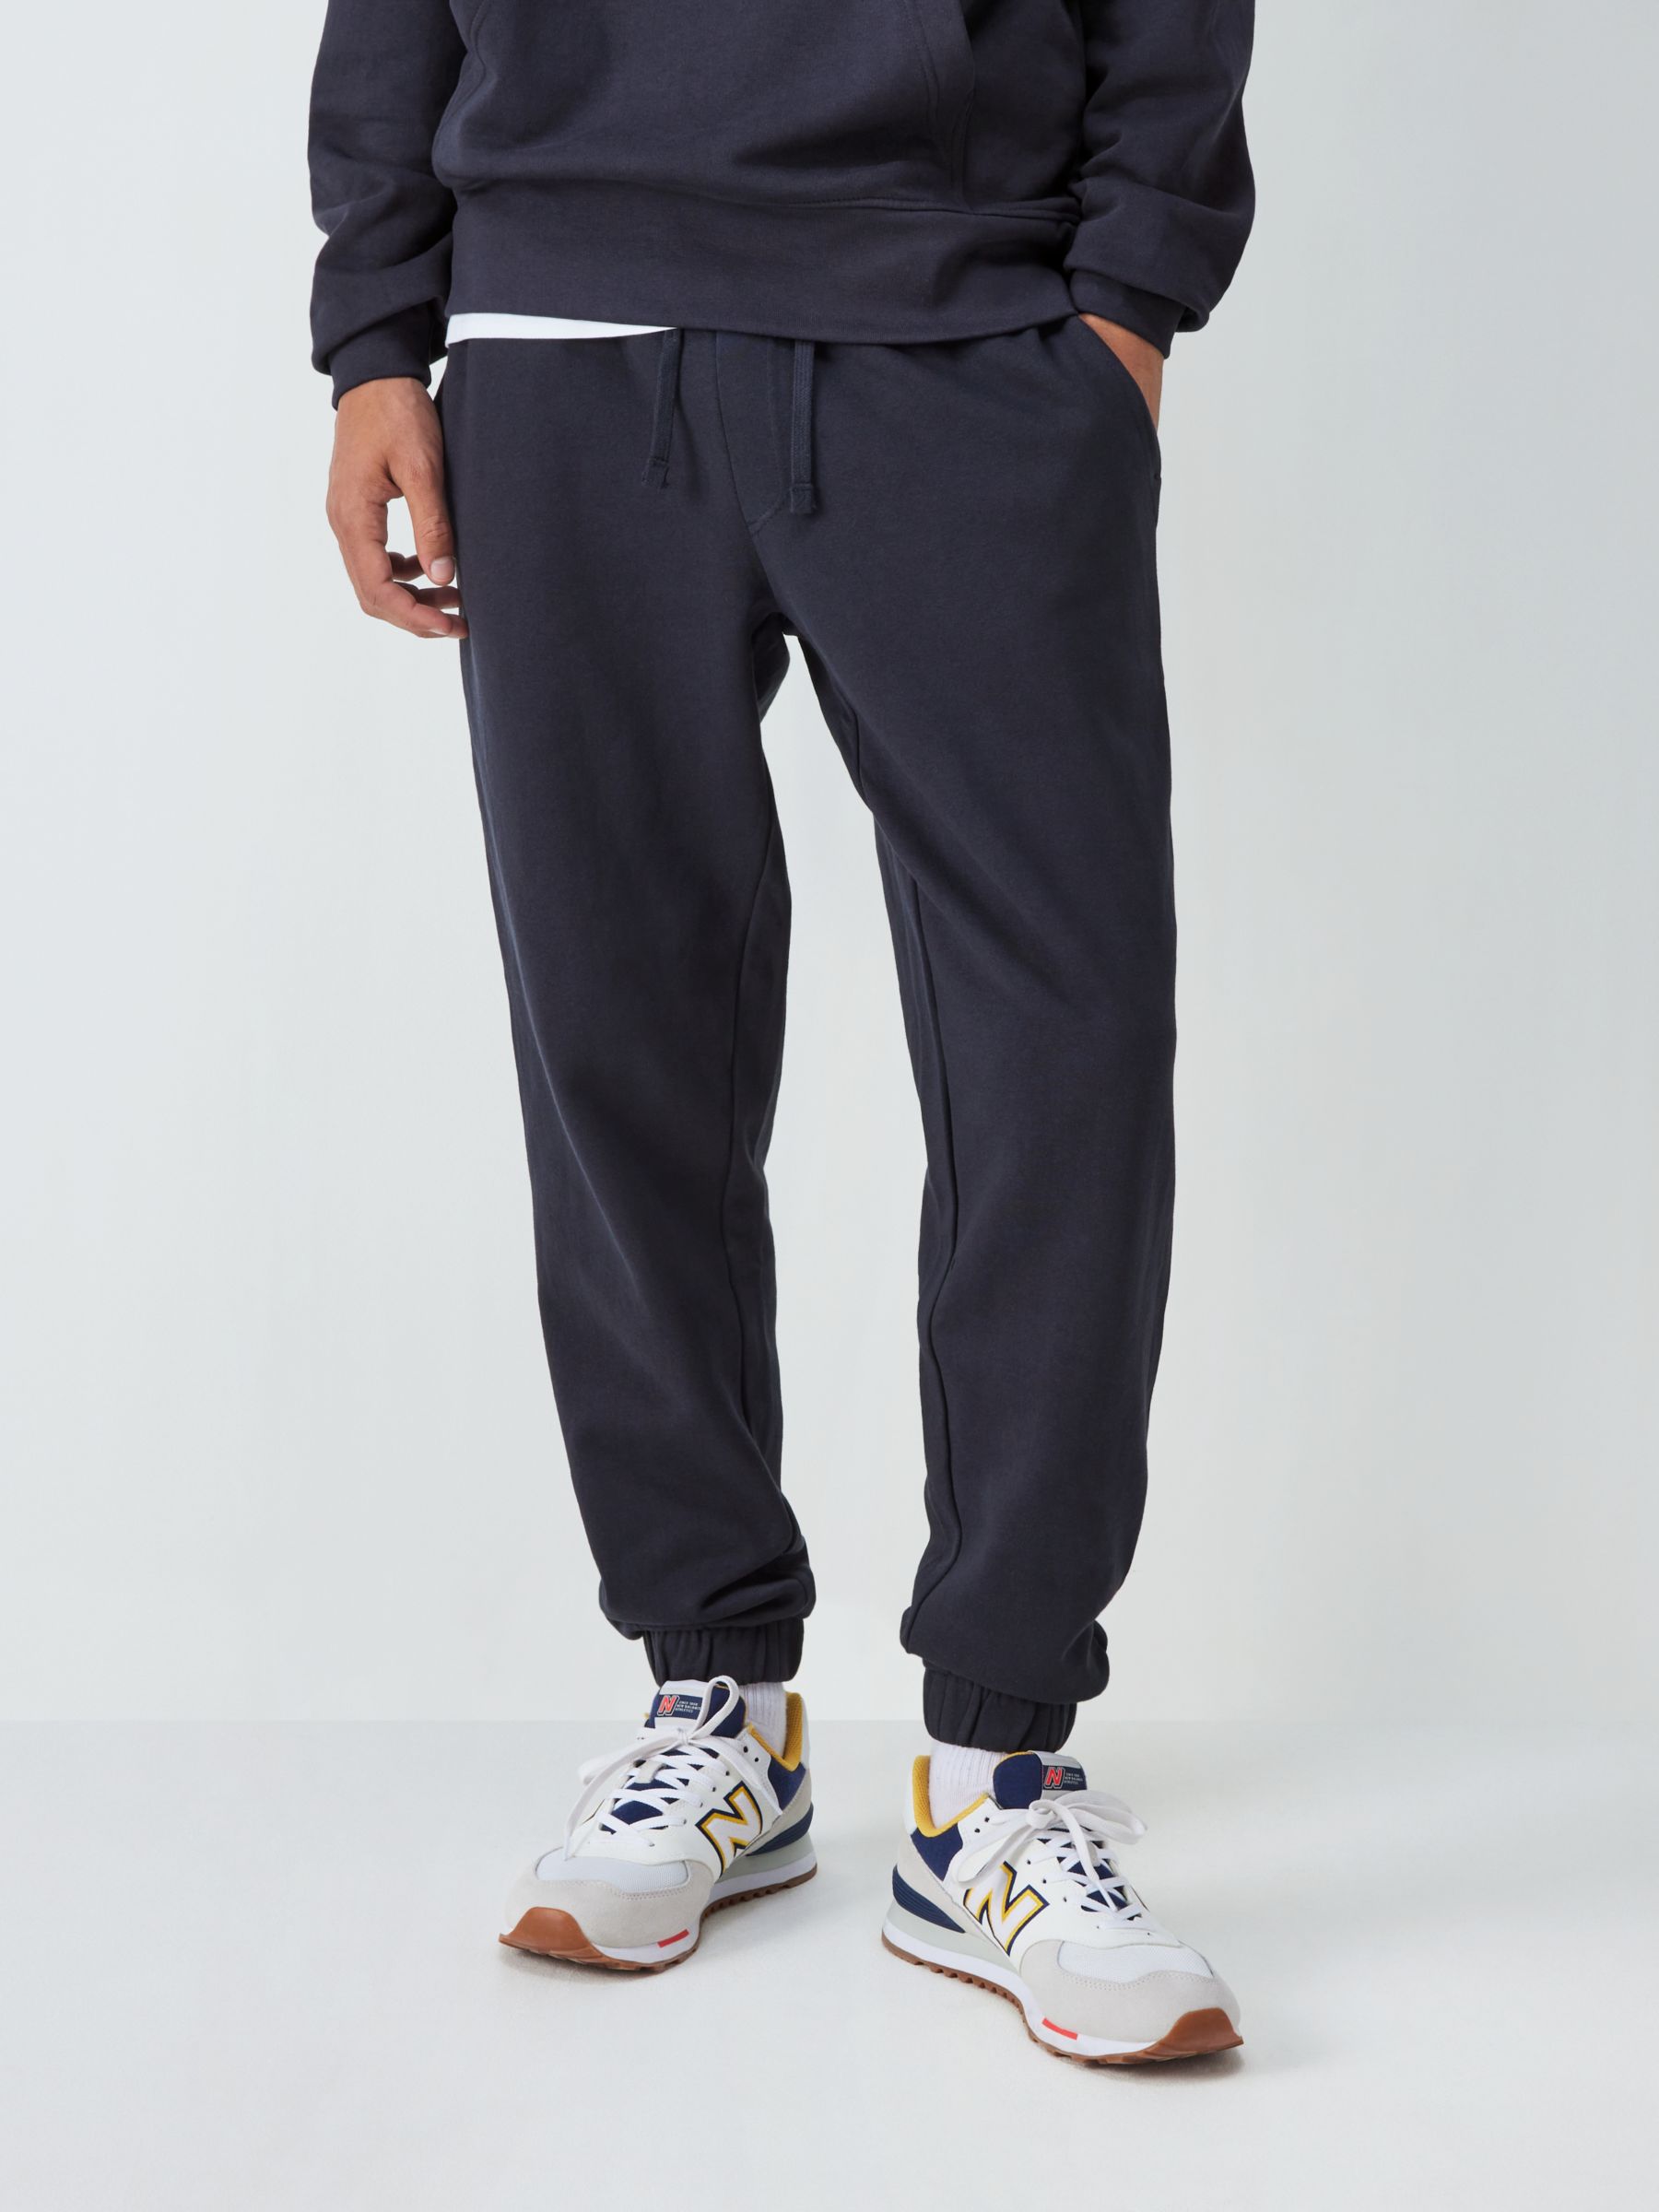 Mens Unisex Fleece Lined Sweat Track Pants Suit Casual Trackies Slim Cuff XS-6XL